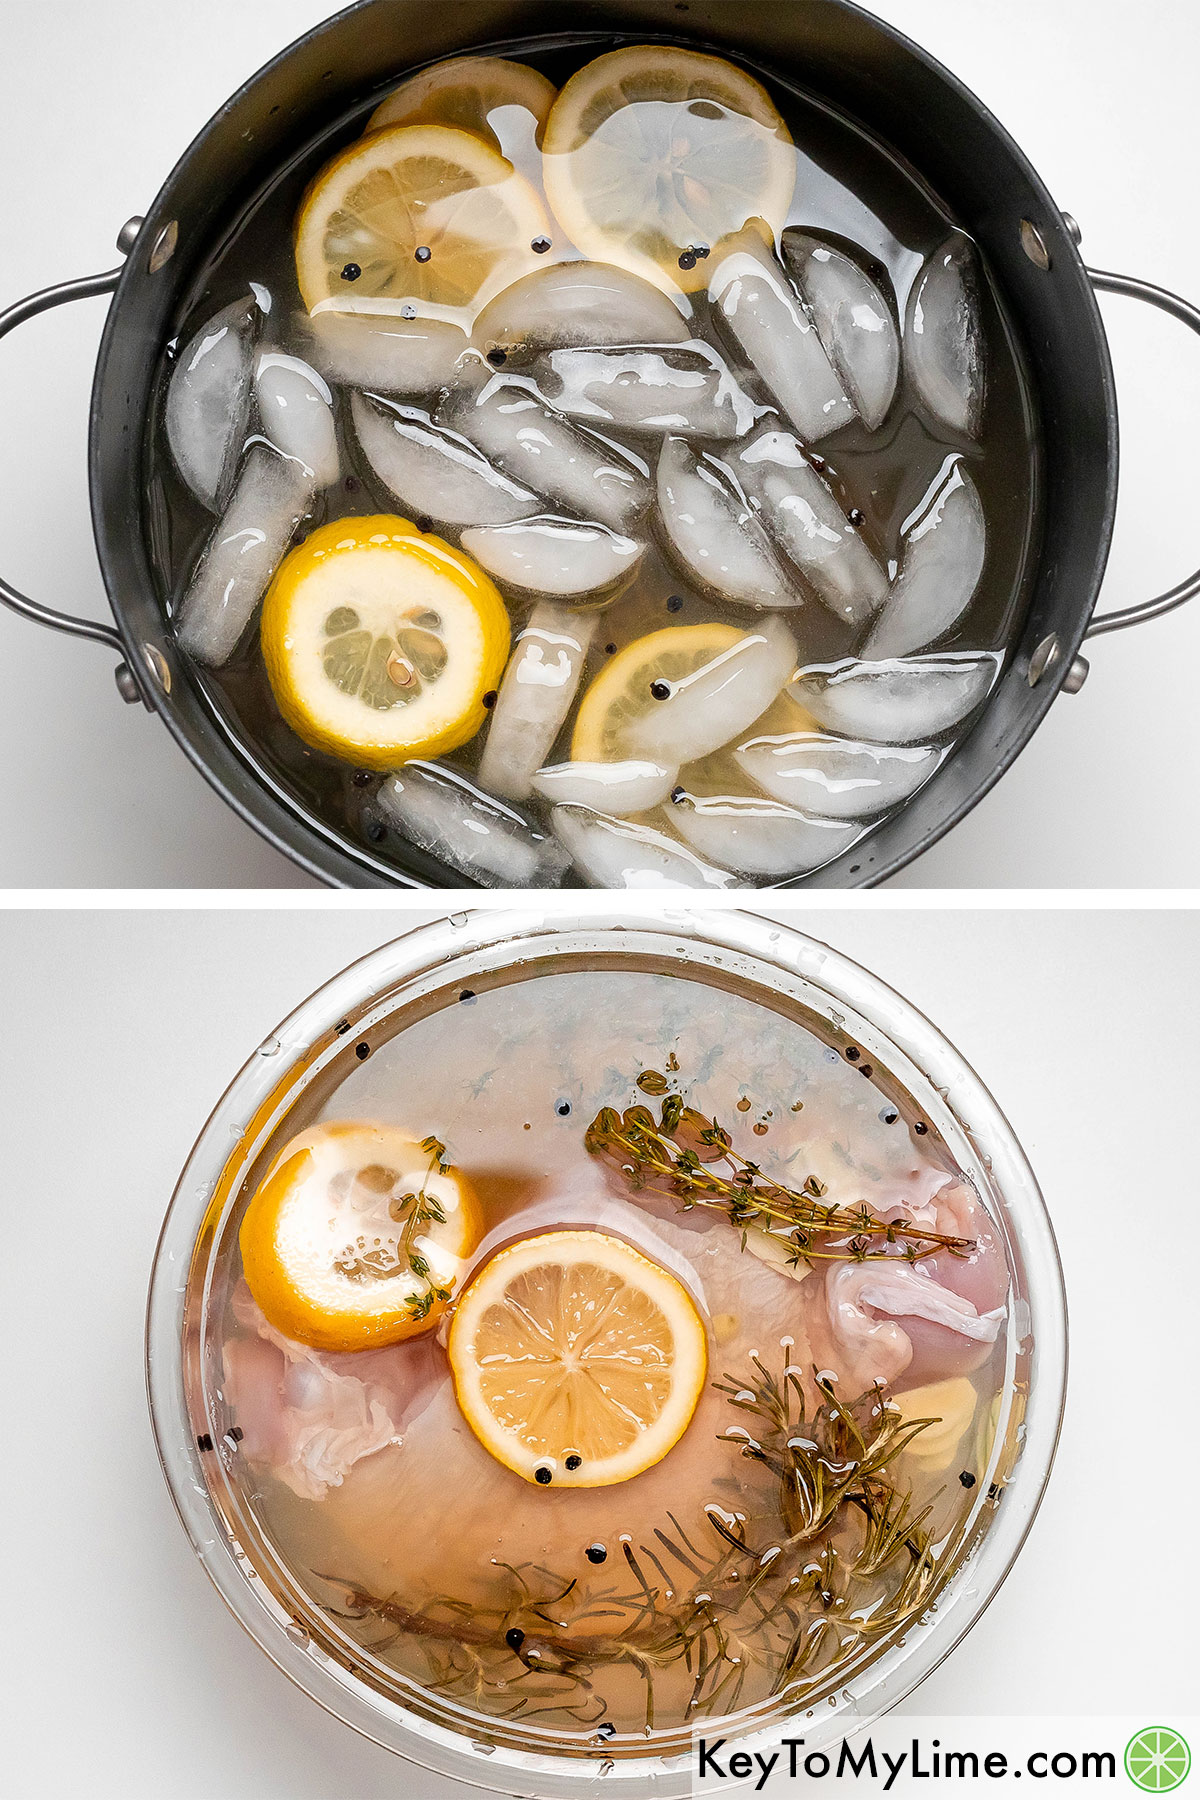 Adding apple cider and ice cubes to cool the brine down, and then submerging a turkey breast in brine.